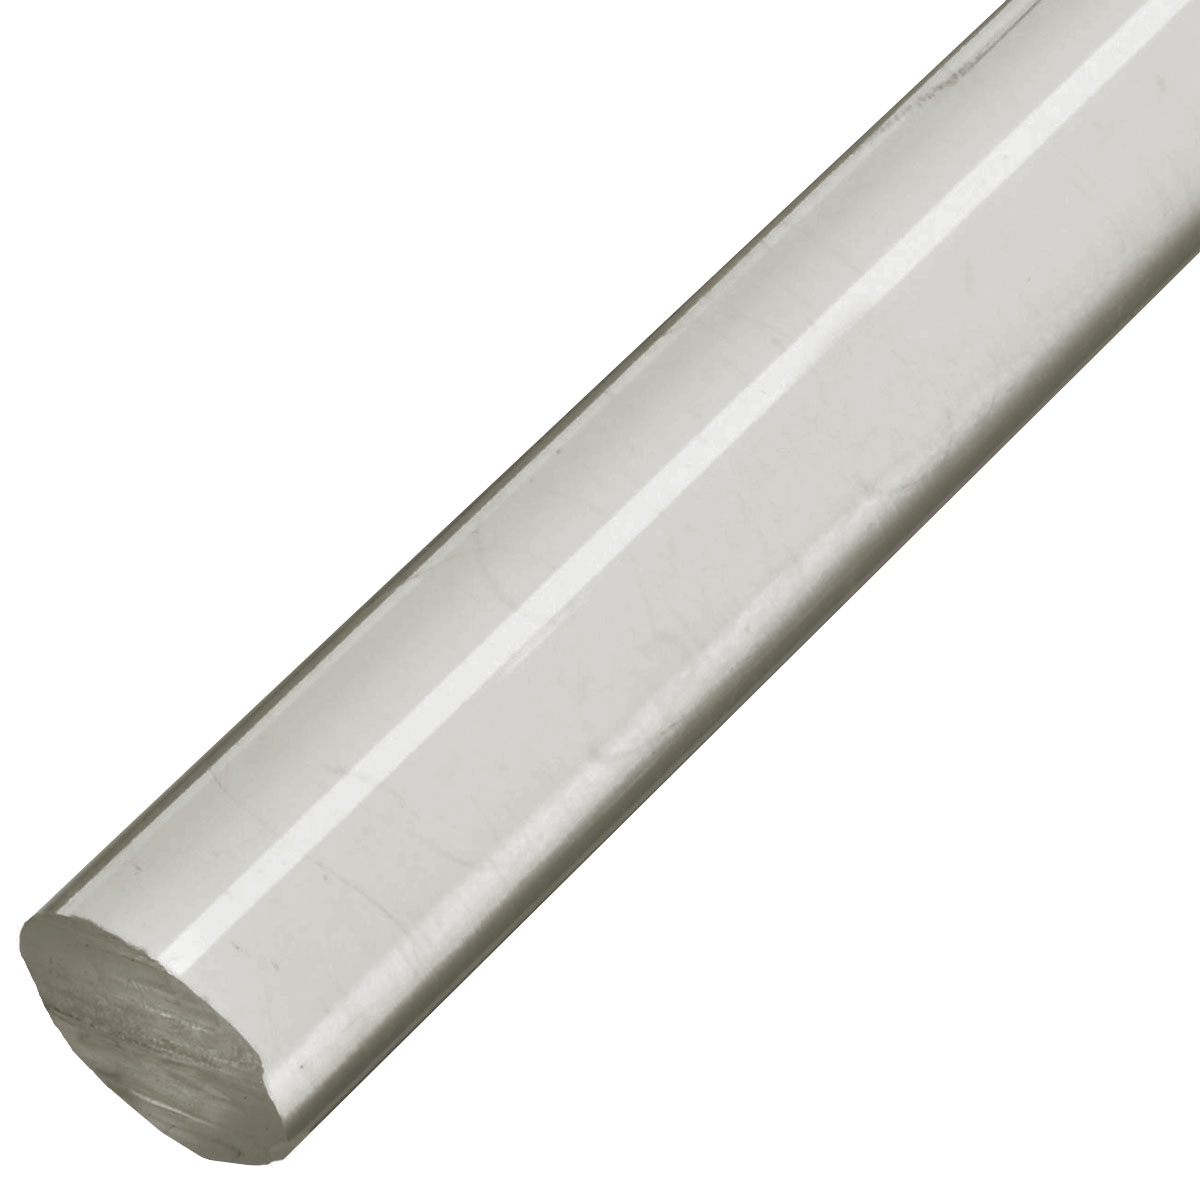 Acrylic Triangular Rod - Clear 72" x 3/4" Dia Pack of 2 Nominal Extruded 